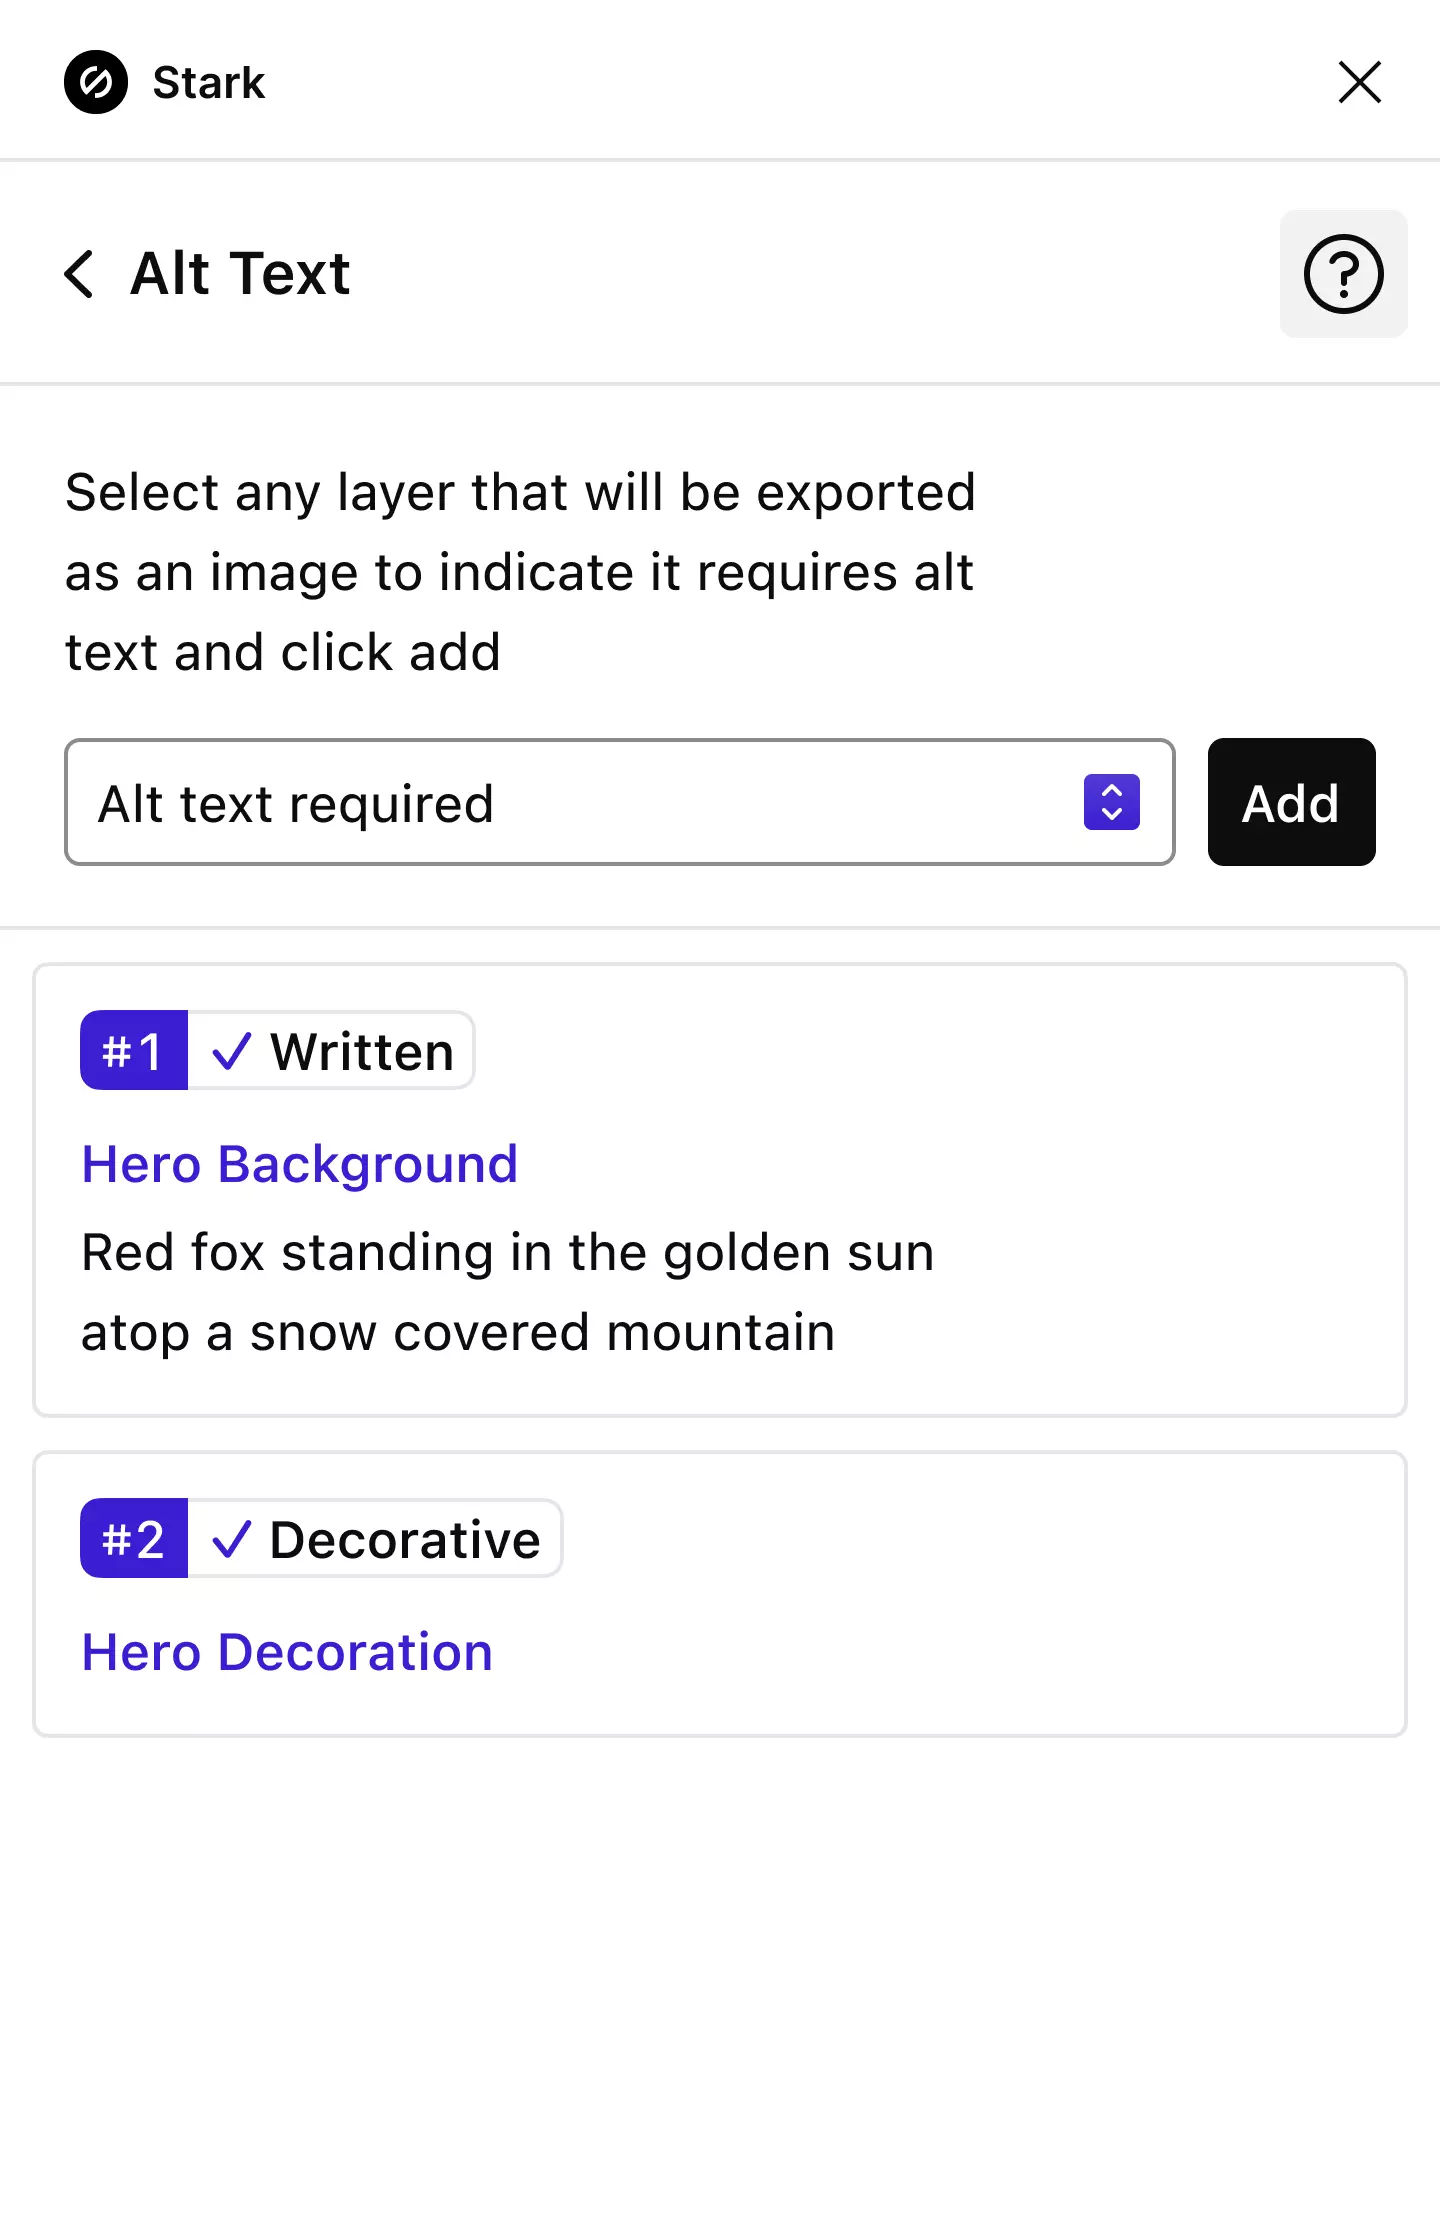 The Stark Alt-Text creator showing instructions for when to add Alt-Text as well as two created annotations: one with the text written and another showing as decorative.